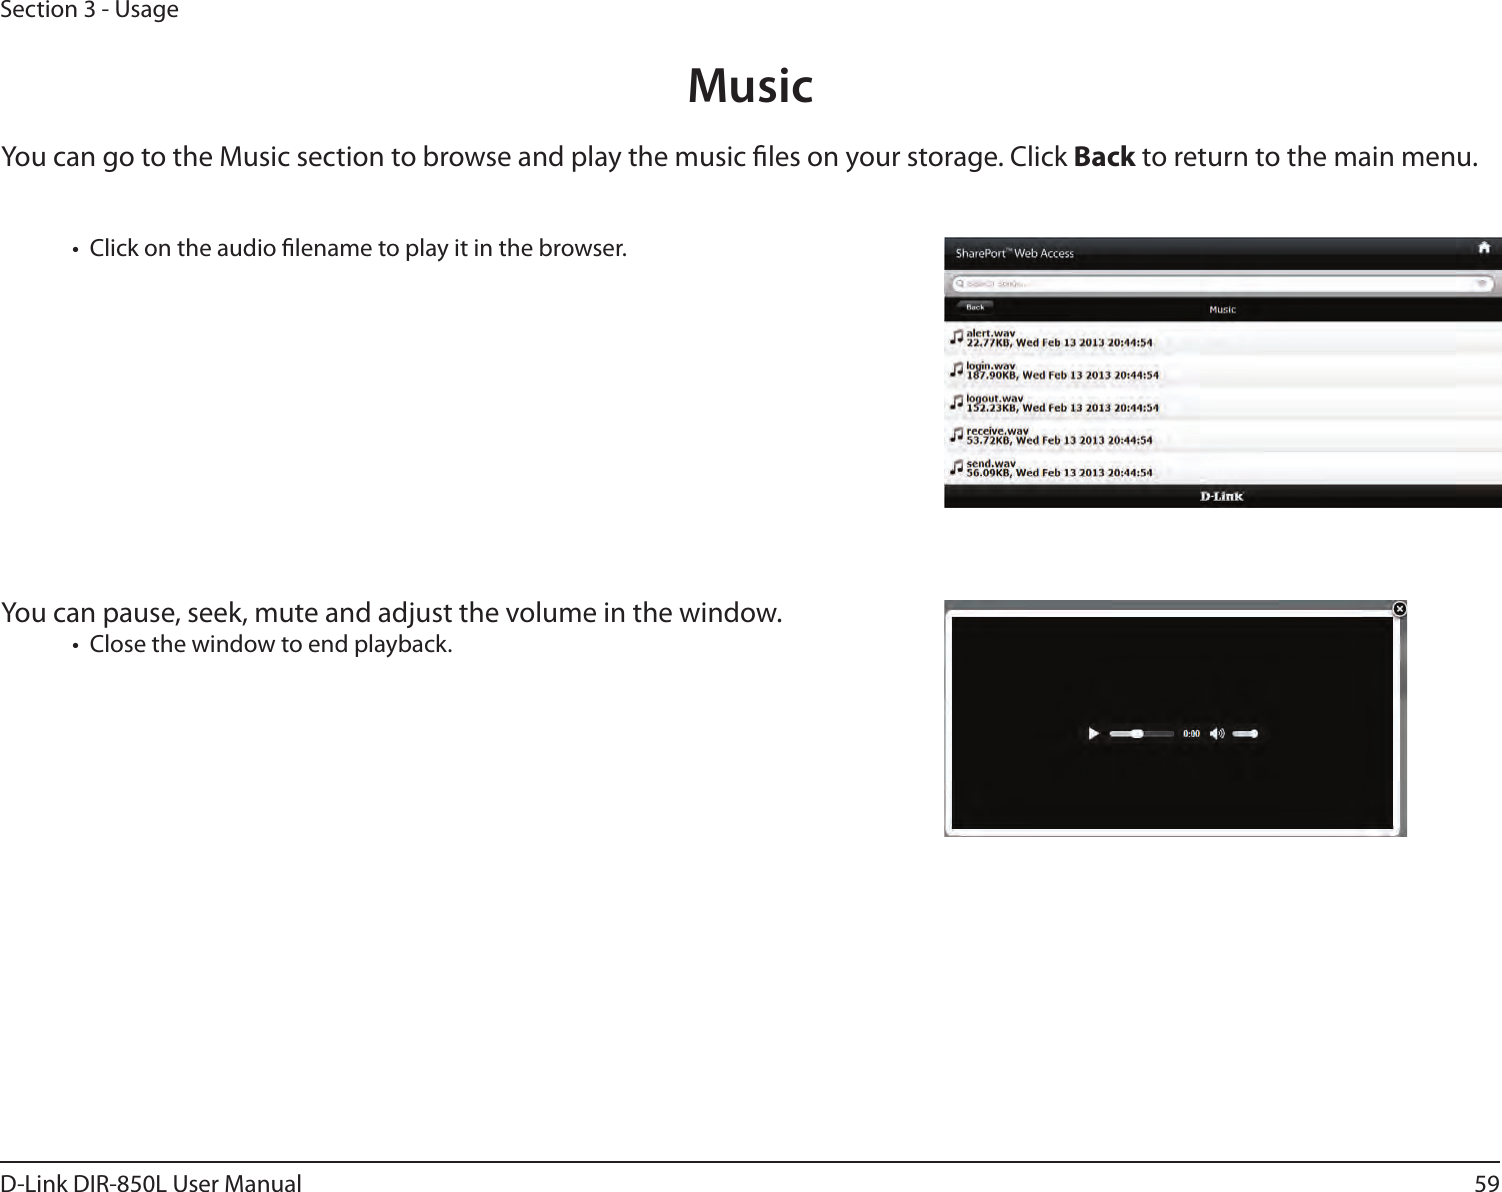 59D-Link DIR-850L User ManualSection 3 - UsageMusicYou can go to the Music section to browse and play the music les on your storage. Click Back to return to the main menu.•  Click on the audio lename to play it in the browser.You can pause, seek, mute and adjust the volume in the window.•  Close the window to end playback.